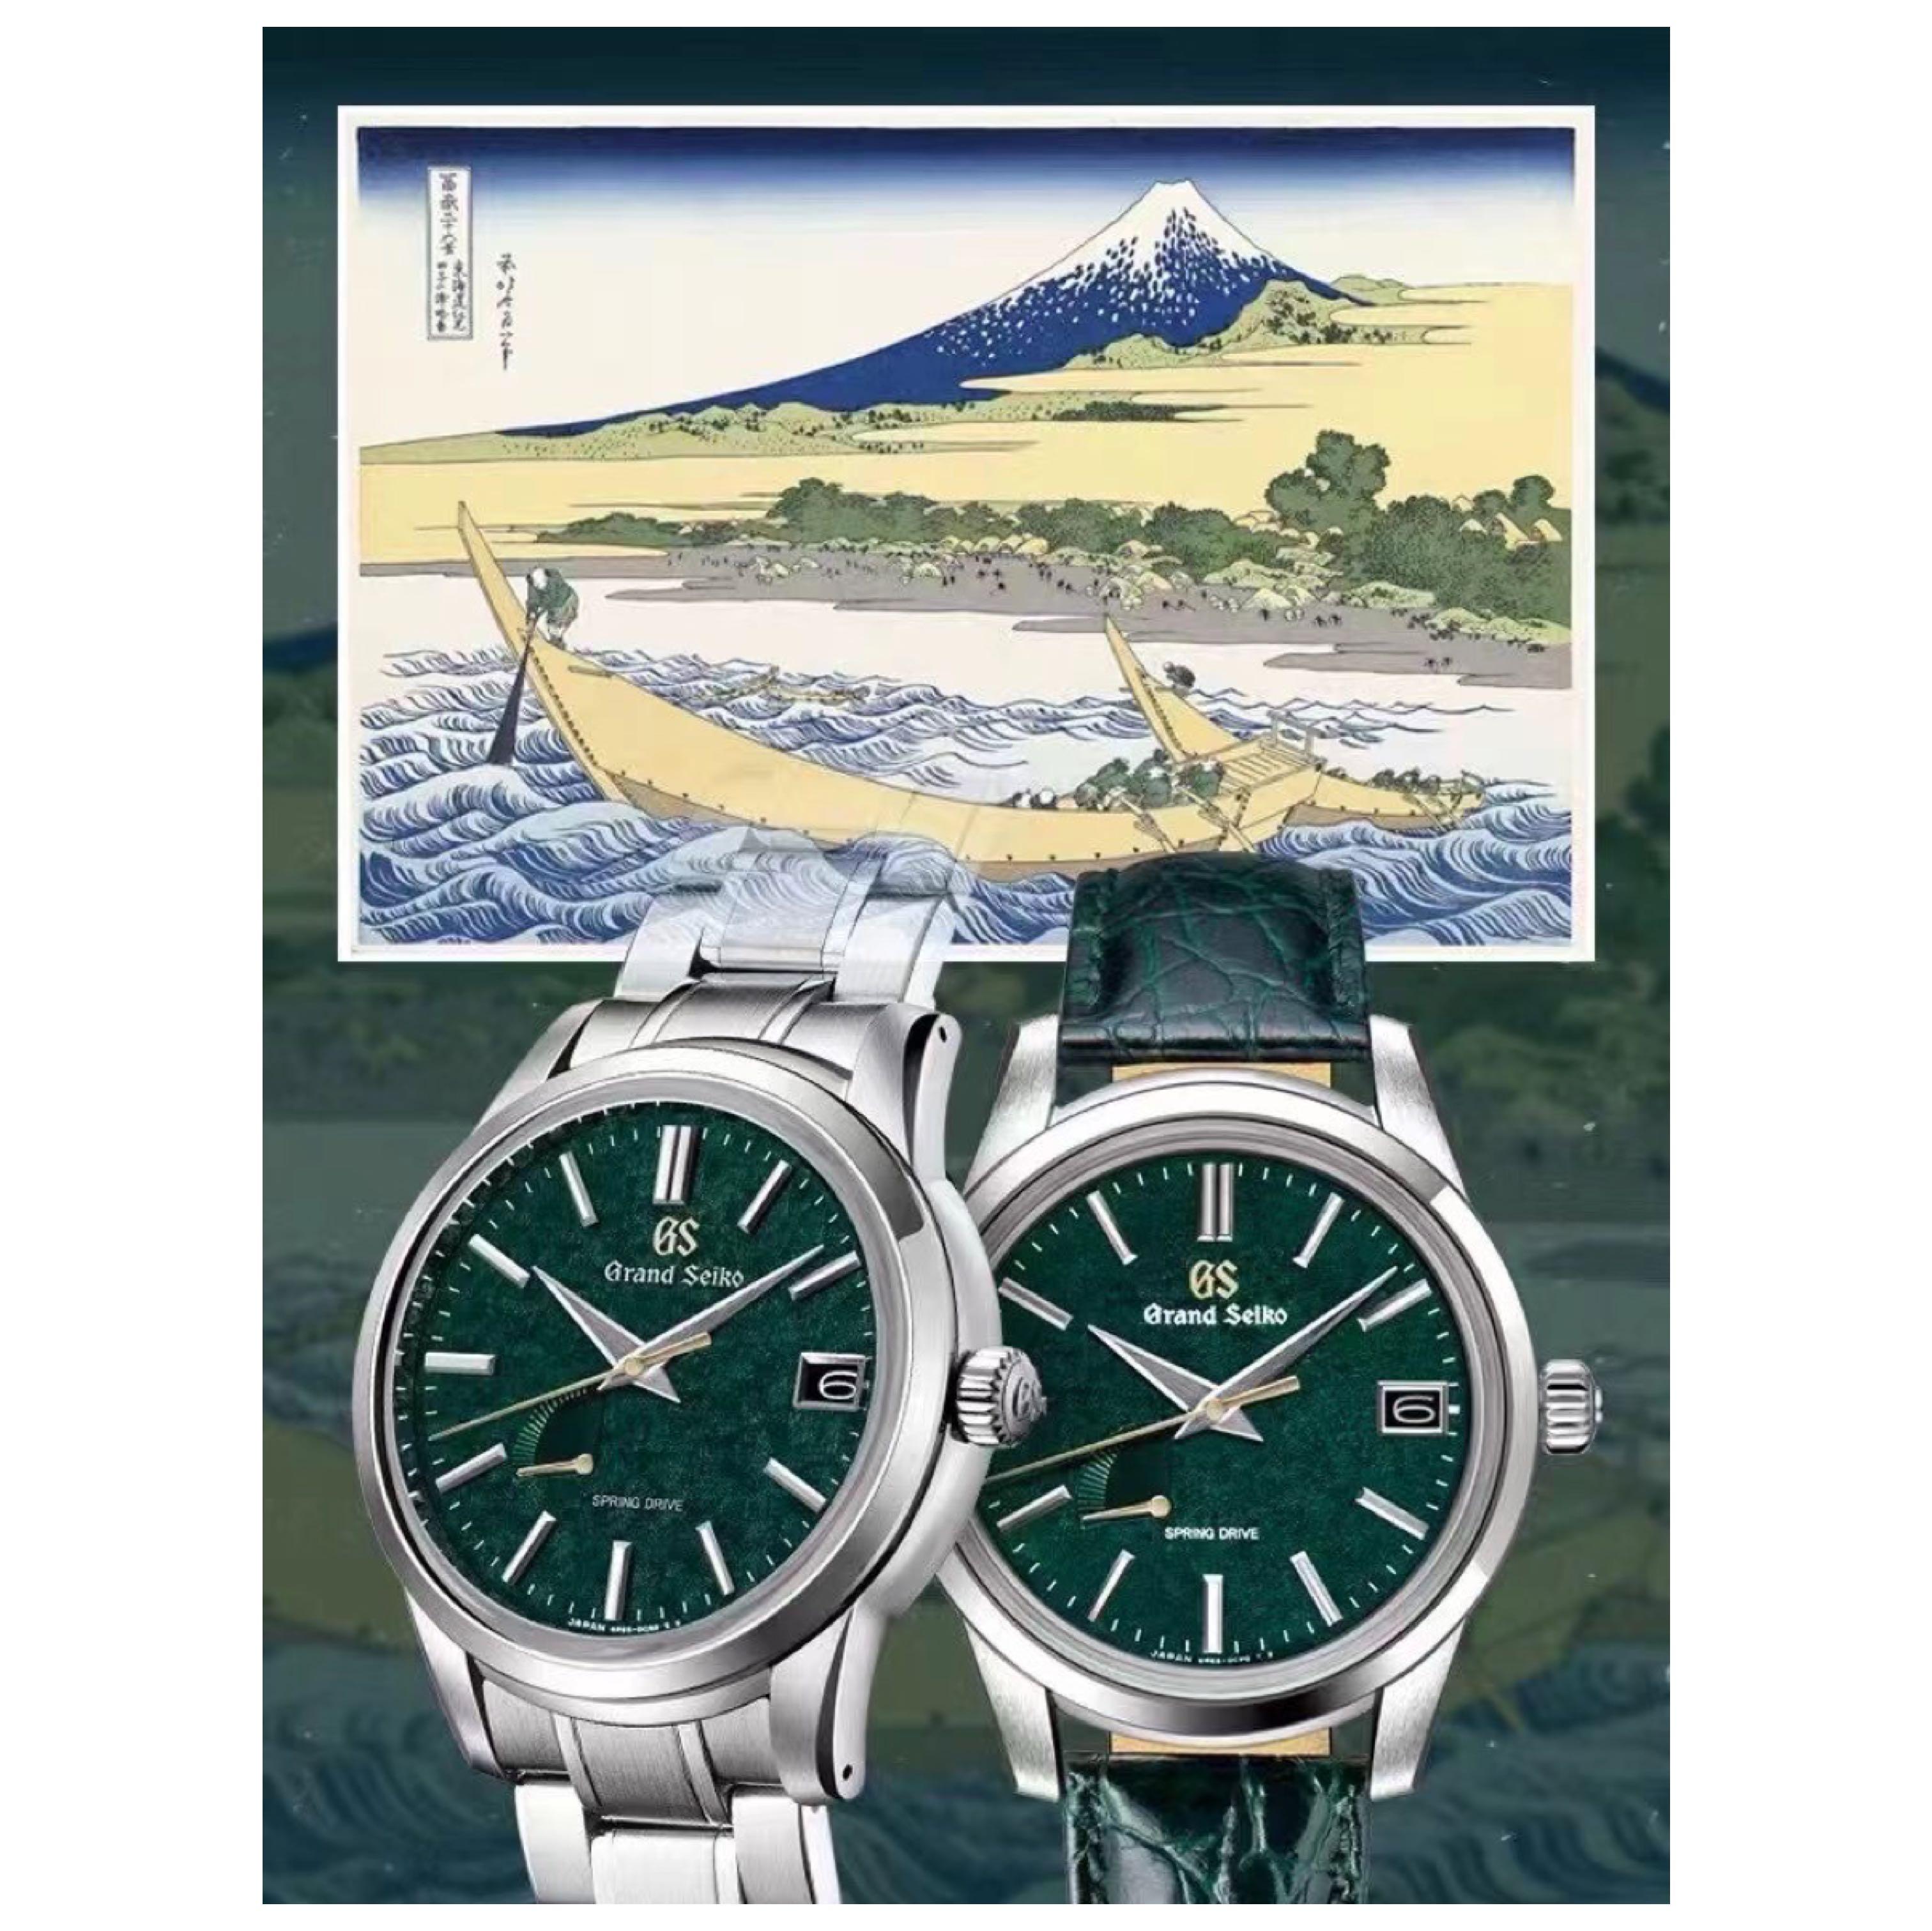 BNIB Grand Seiko China 2021 Limited Edition 500 Pieces SBGA453G SBGA453 Green  Dial Leather Strap Men Watch (Preorder - Free gift will be provided if  preorder early & depends on availability) | Lazada Singapore